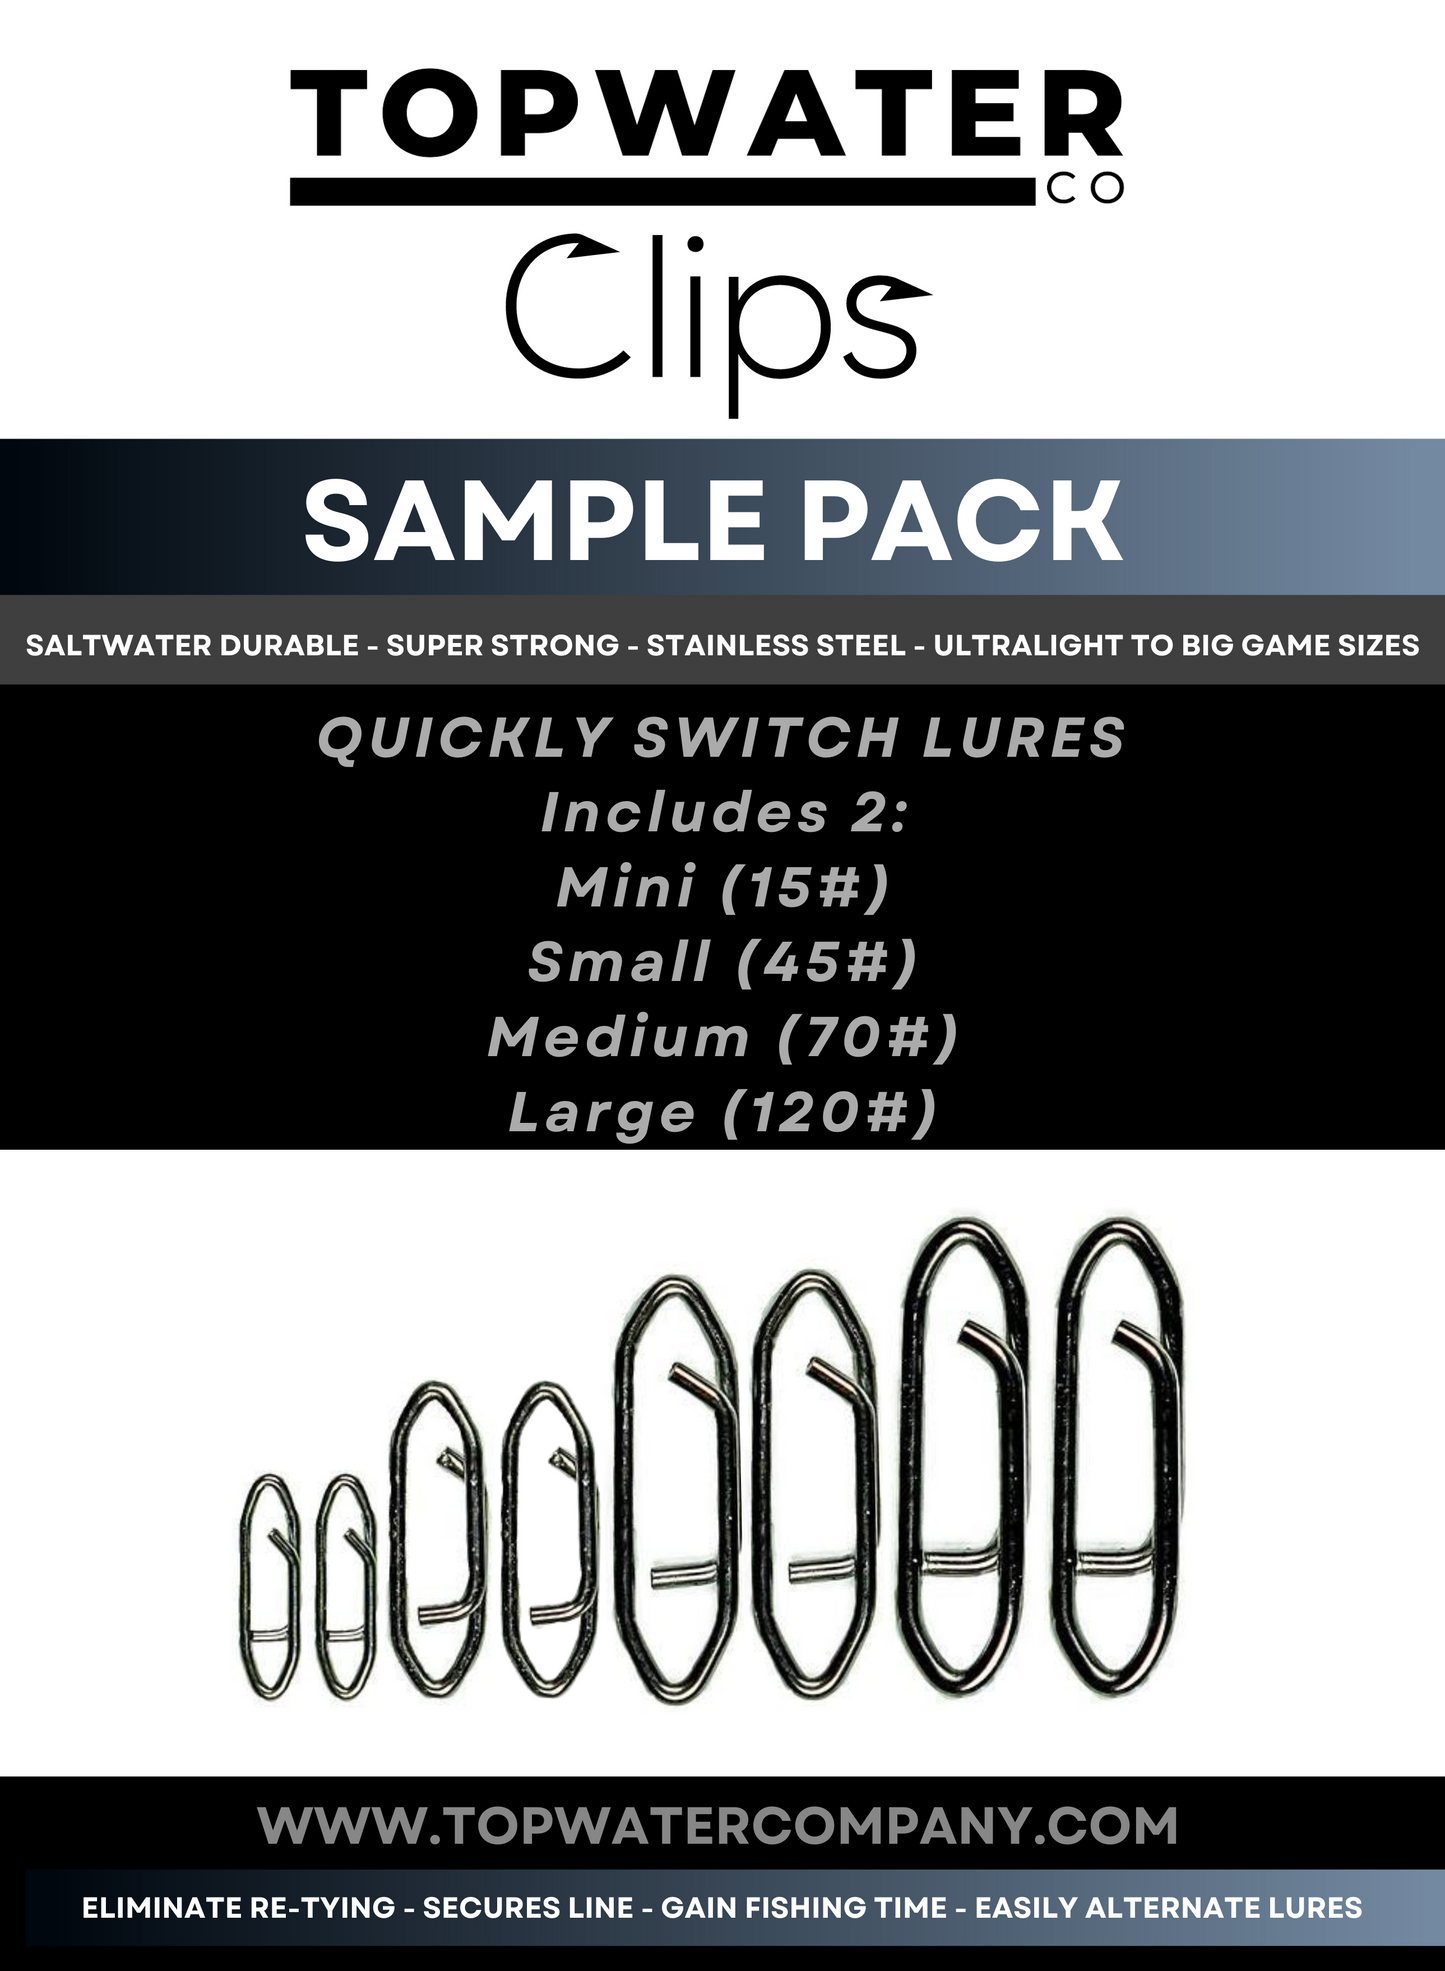 Speed Clip Sample Pack – Topwater Co